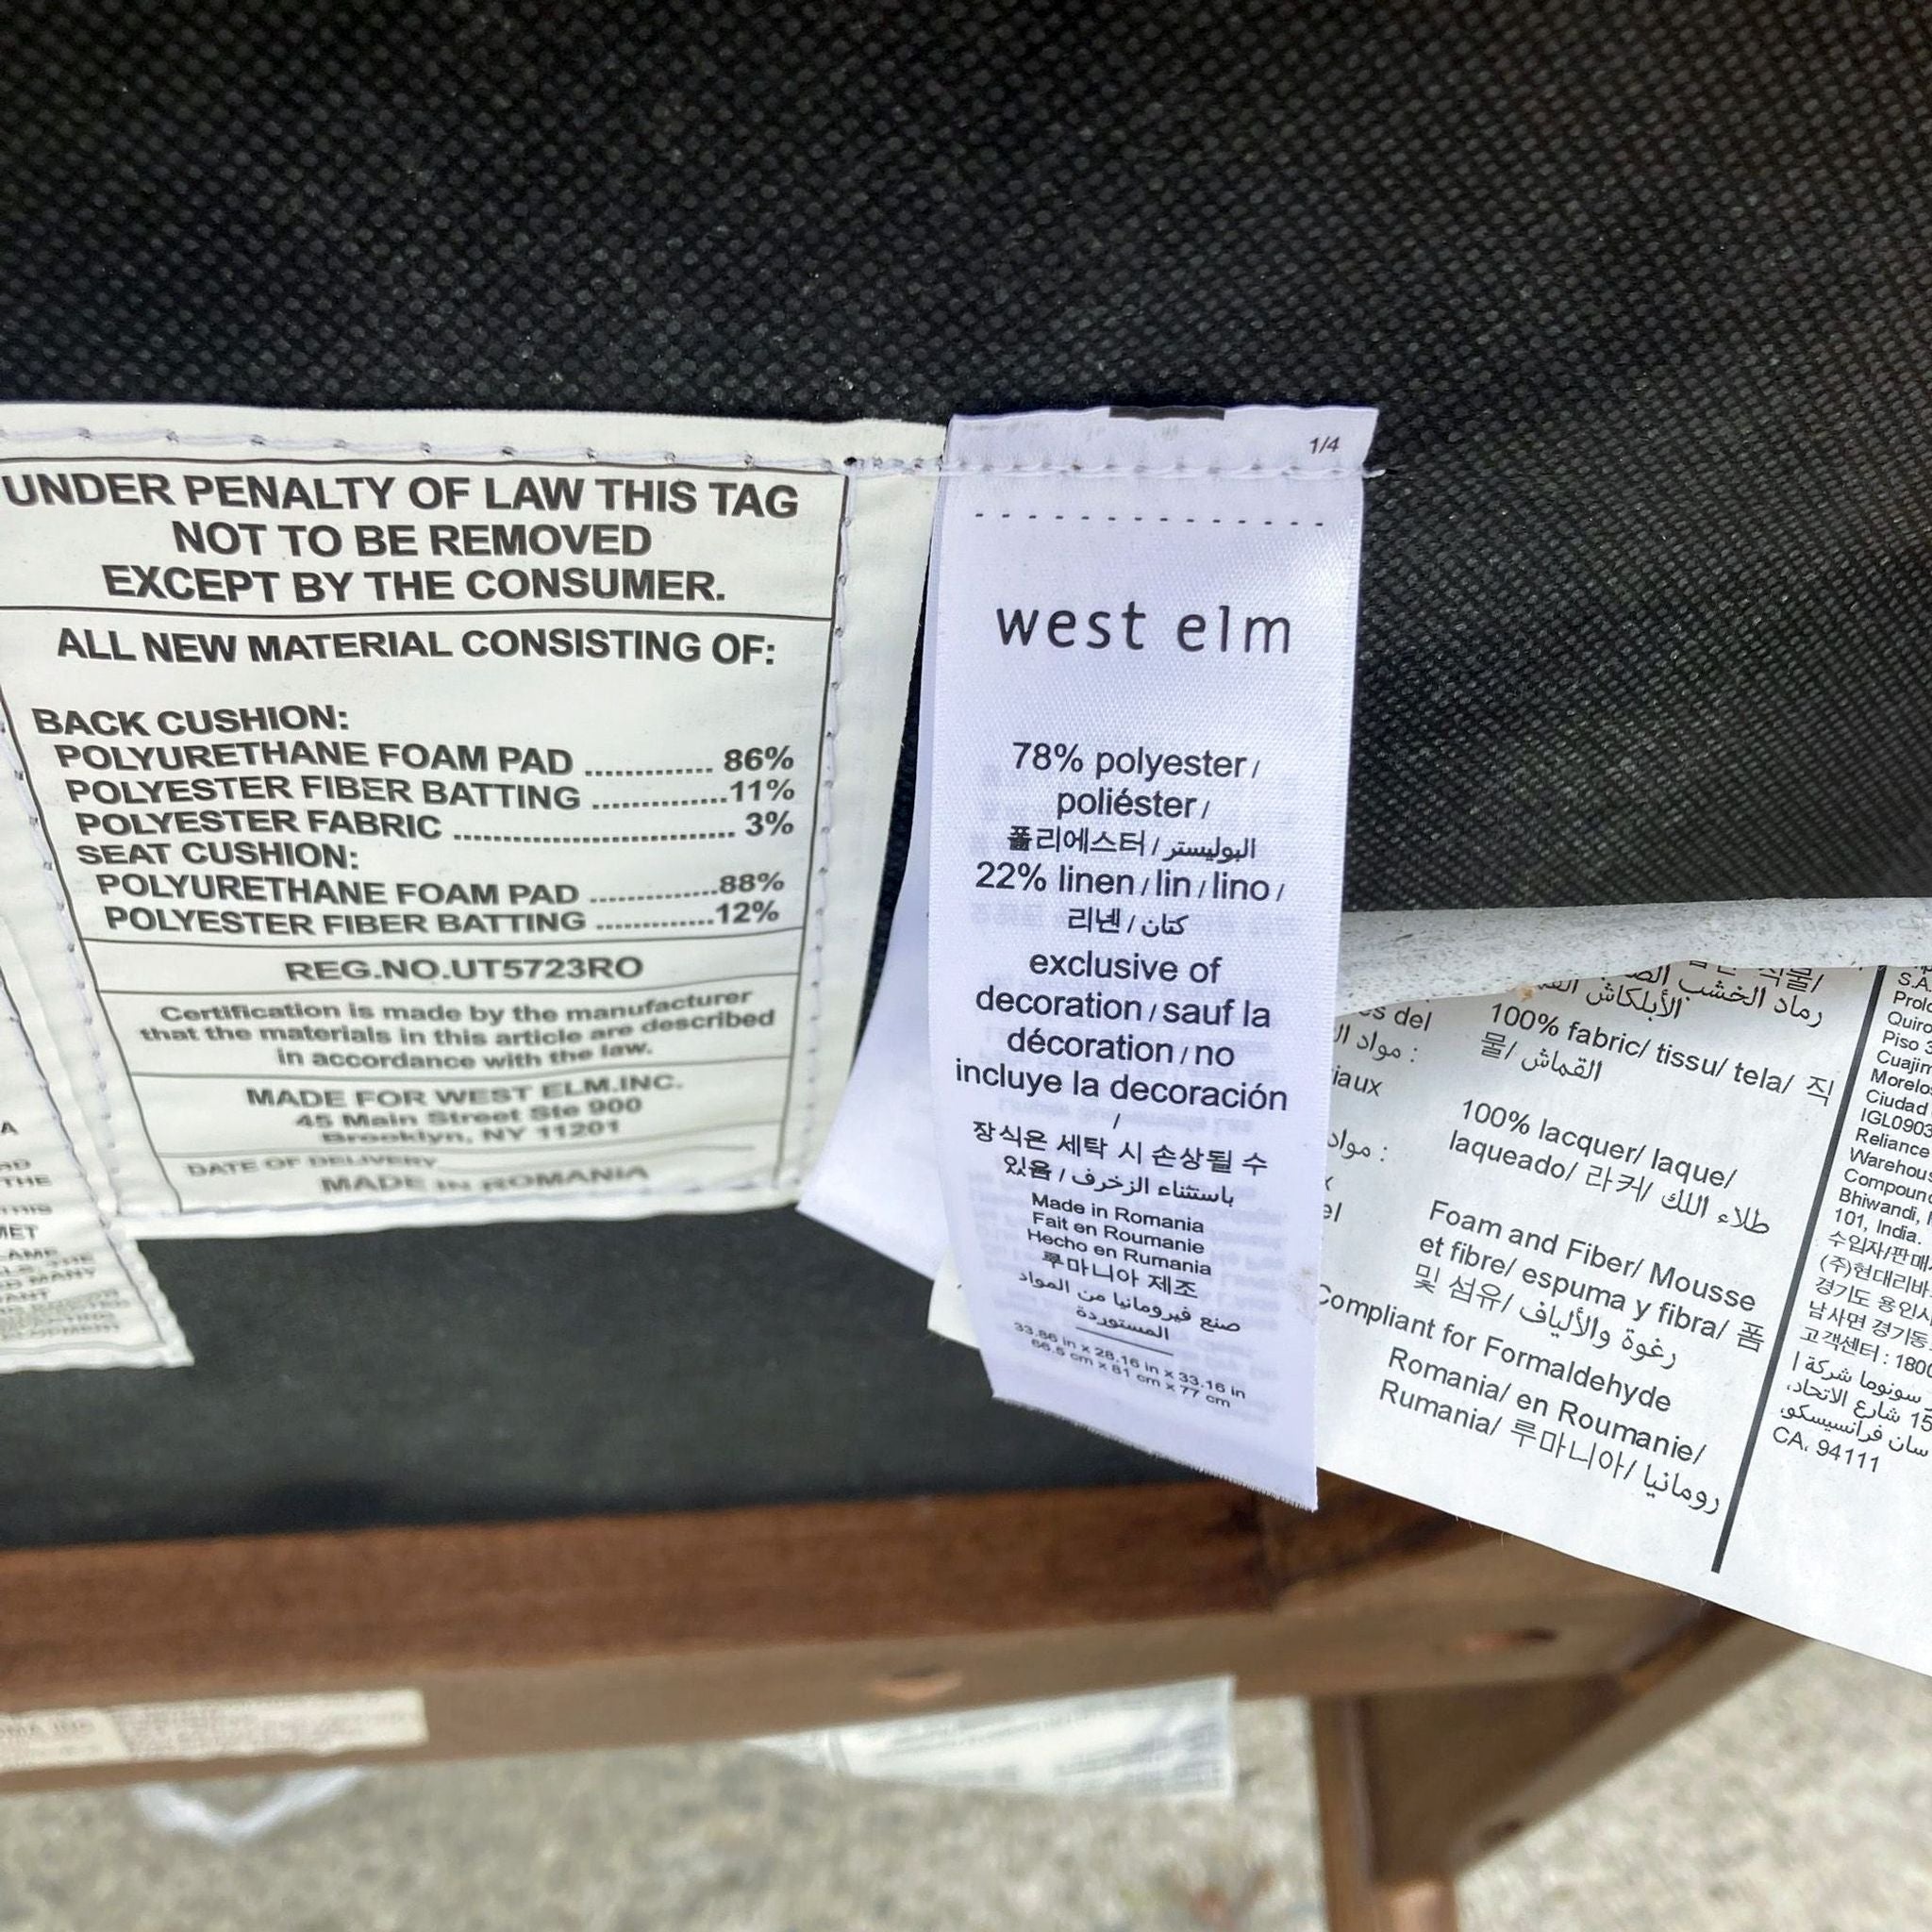 3. Care labels and material composition details on a West Elm chair, specifying polyester and linen content.